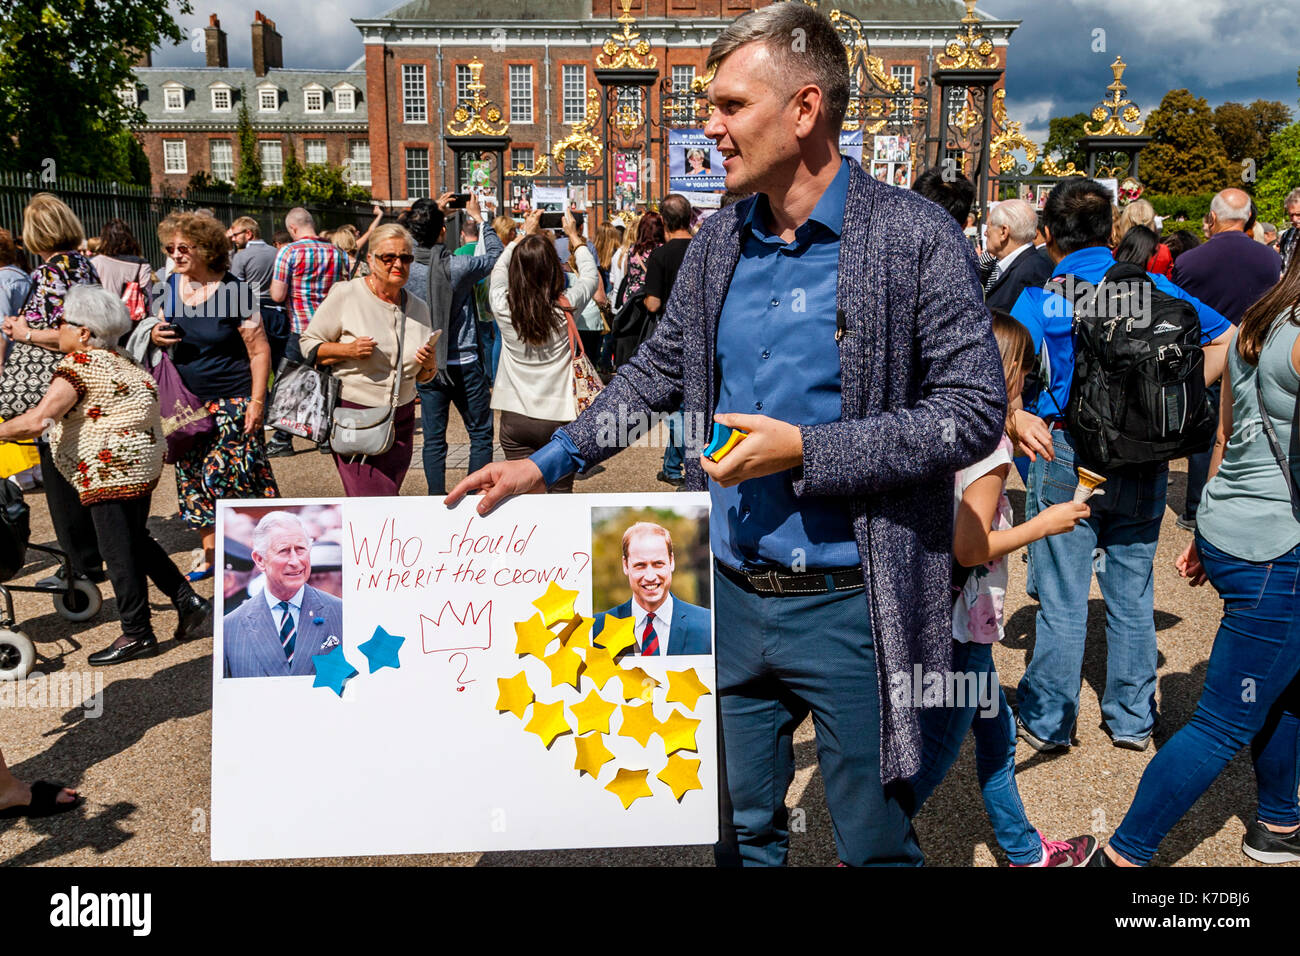 A TV Reporter Outside Kensington Palace On The 20th Anniversary Of The Death Of Princess Diana Asking People Who Should Be The Next King, London, UK Stock Photo